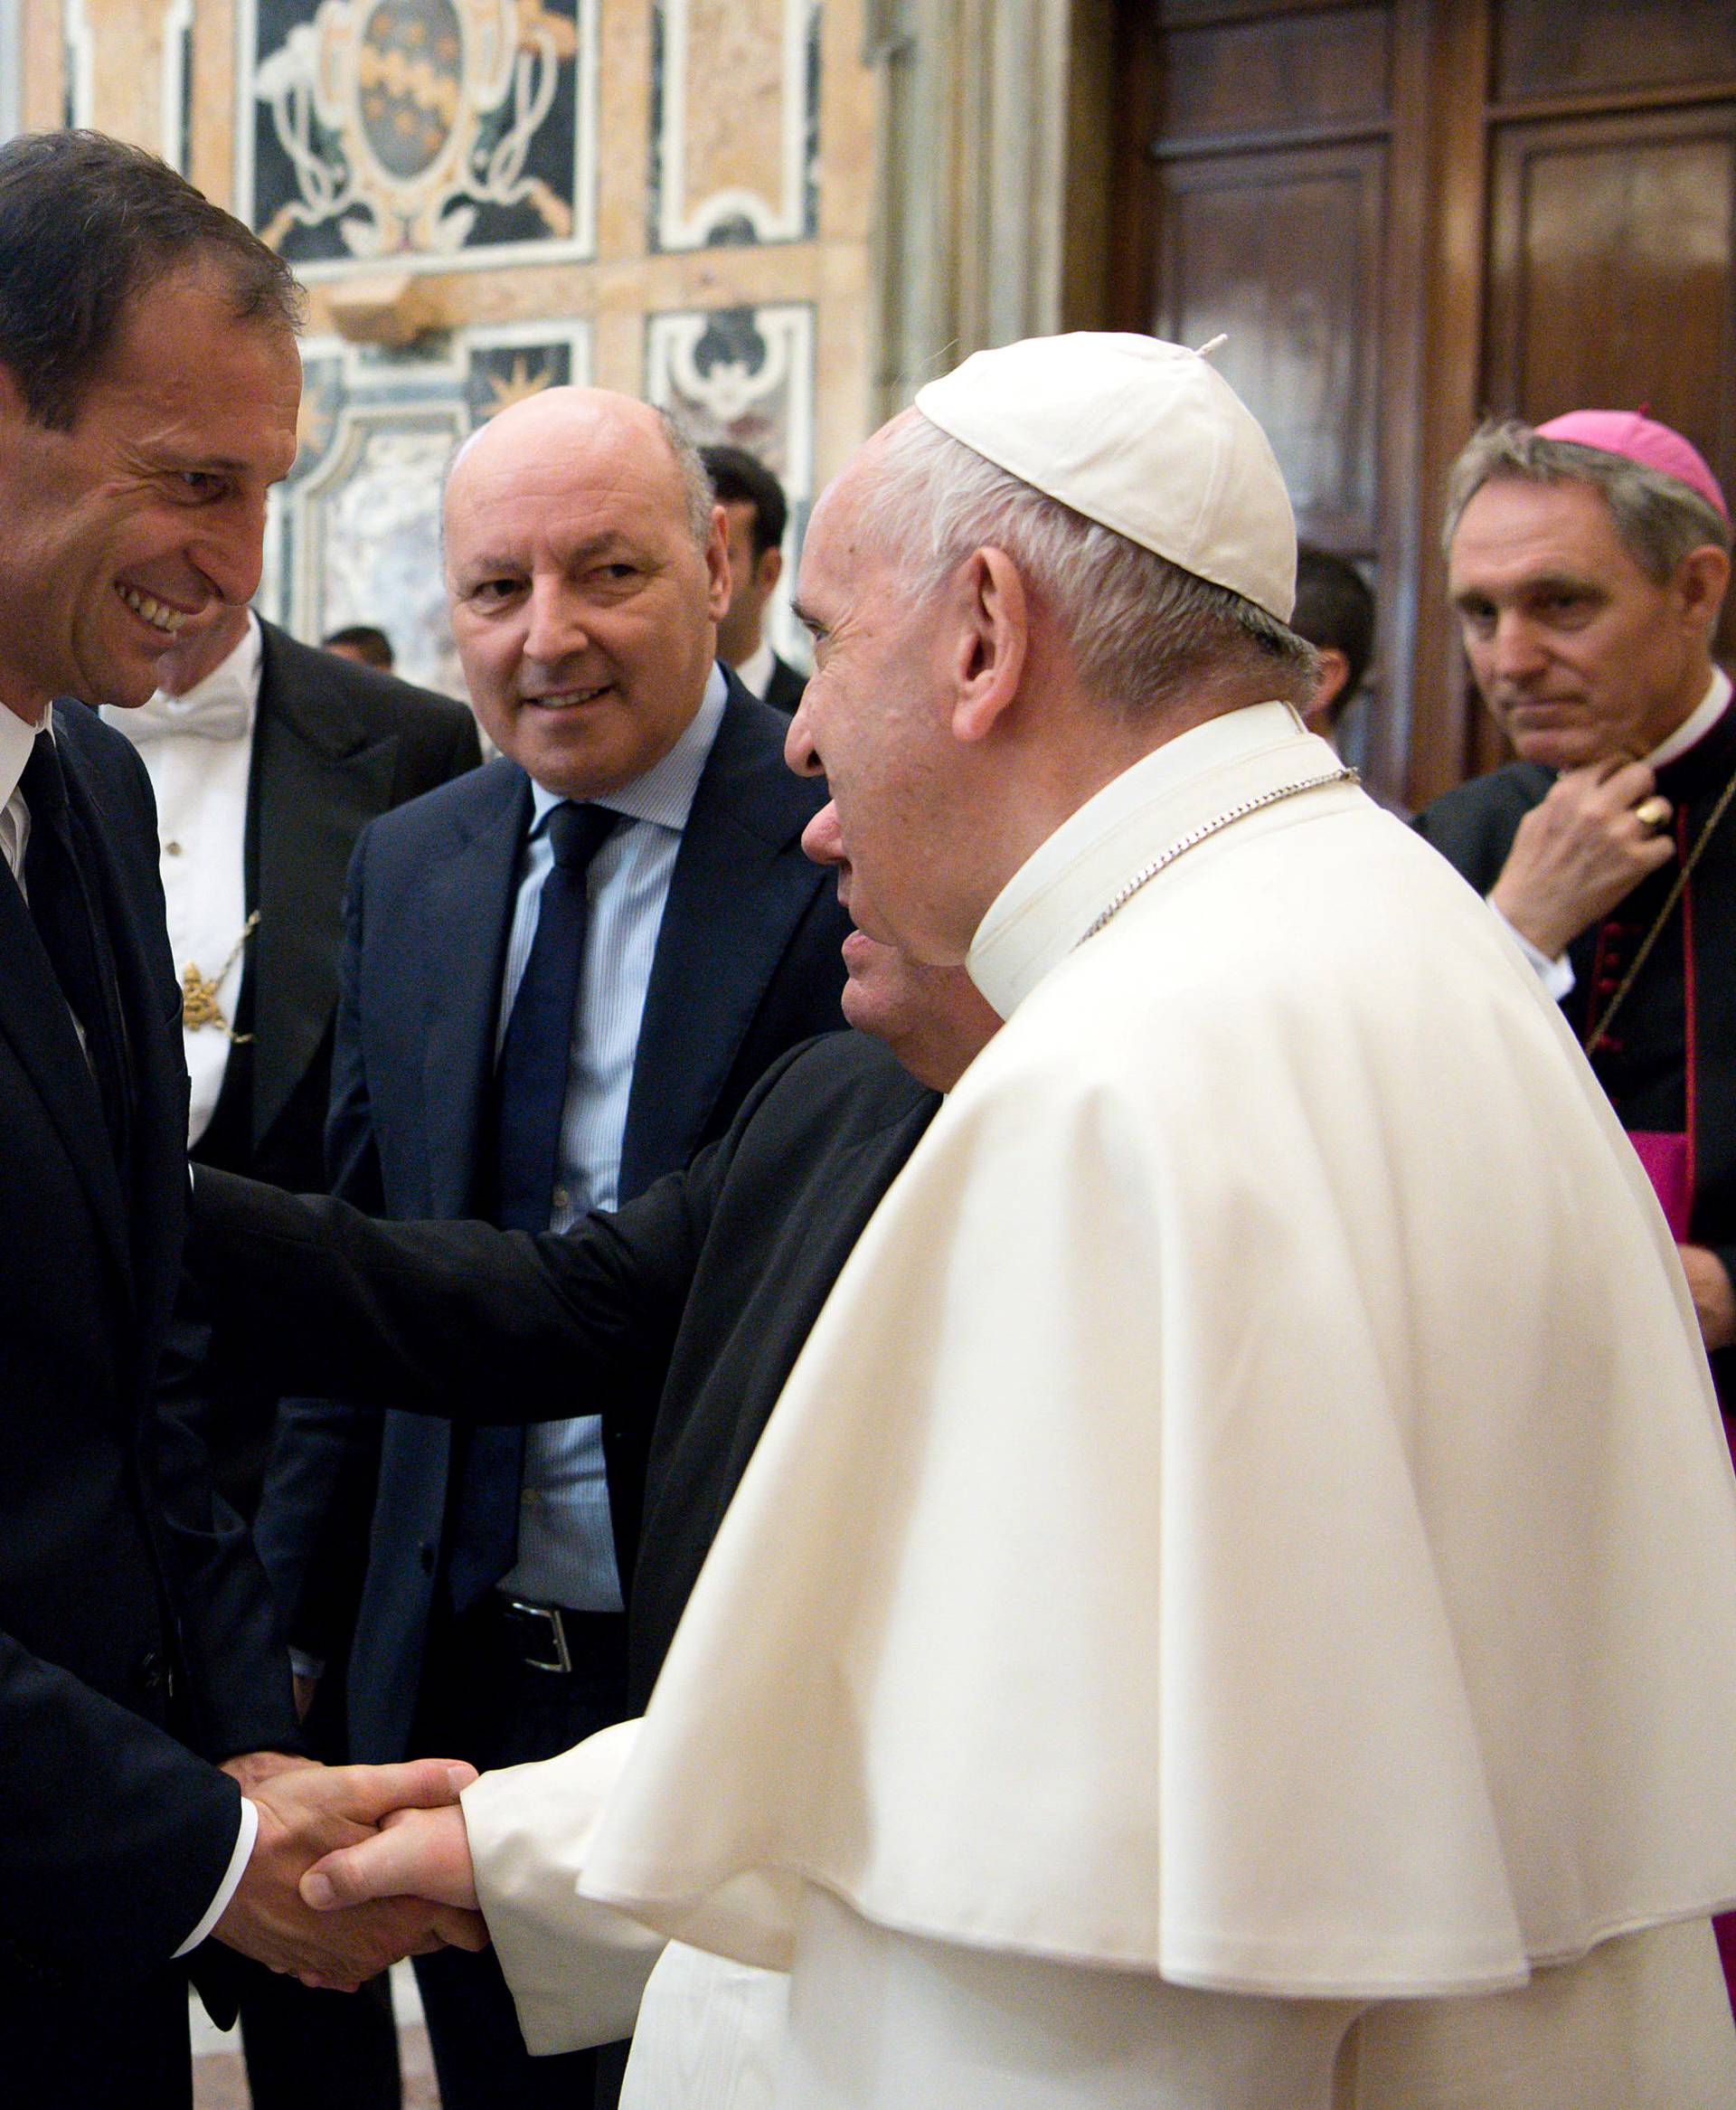 Juventus coach Allegri shakes hands with Pope Francis during a private audience at the Vatican